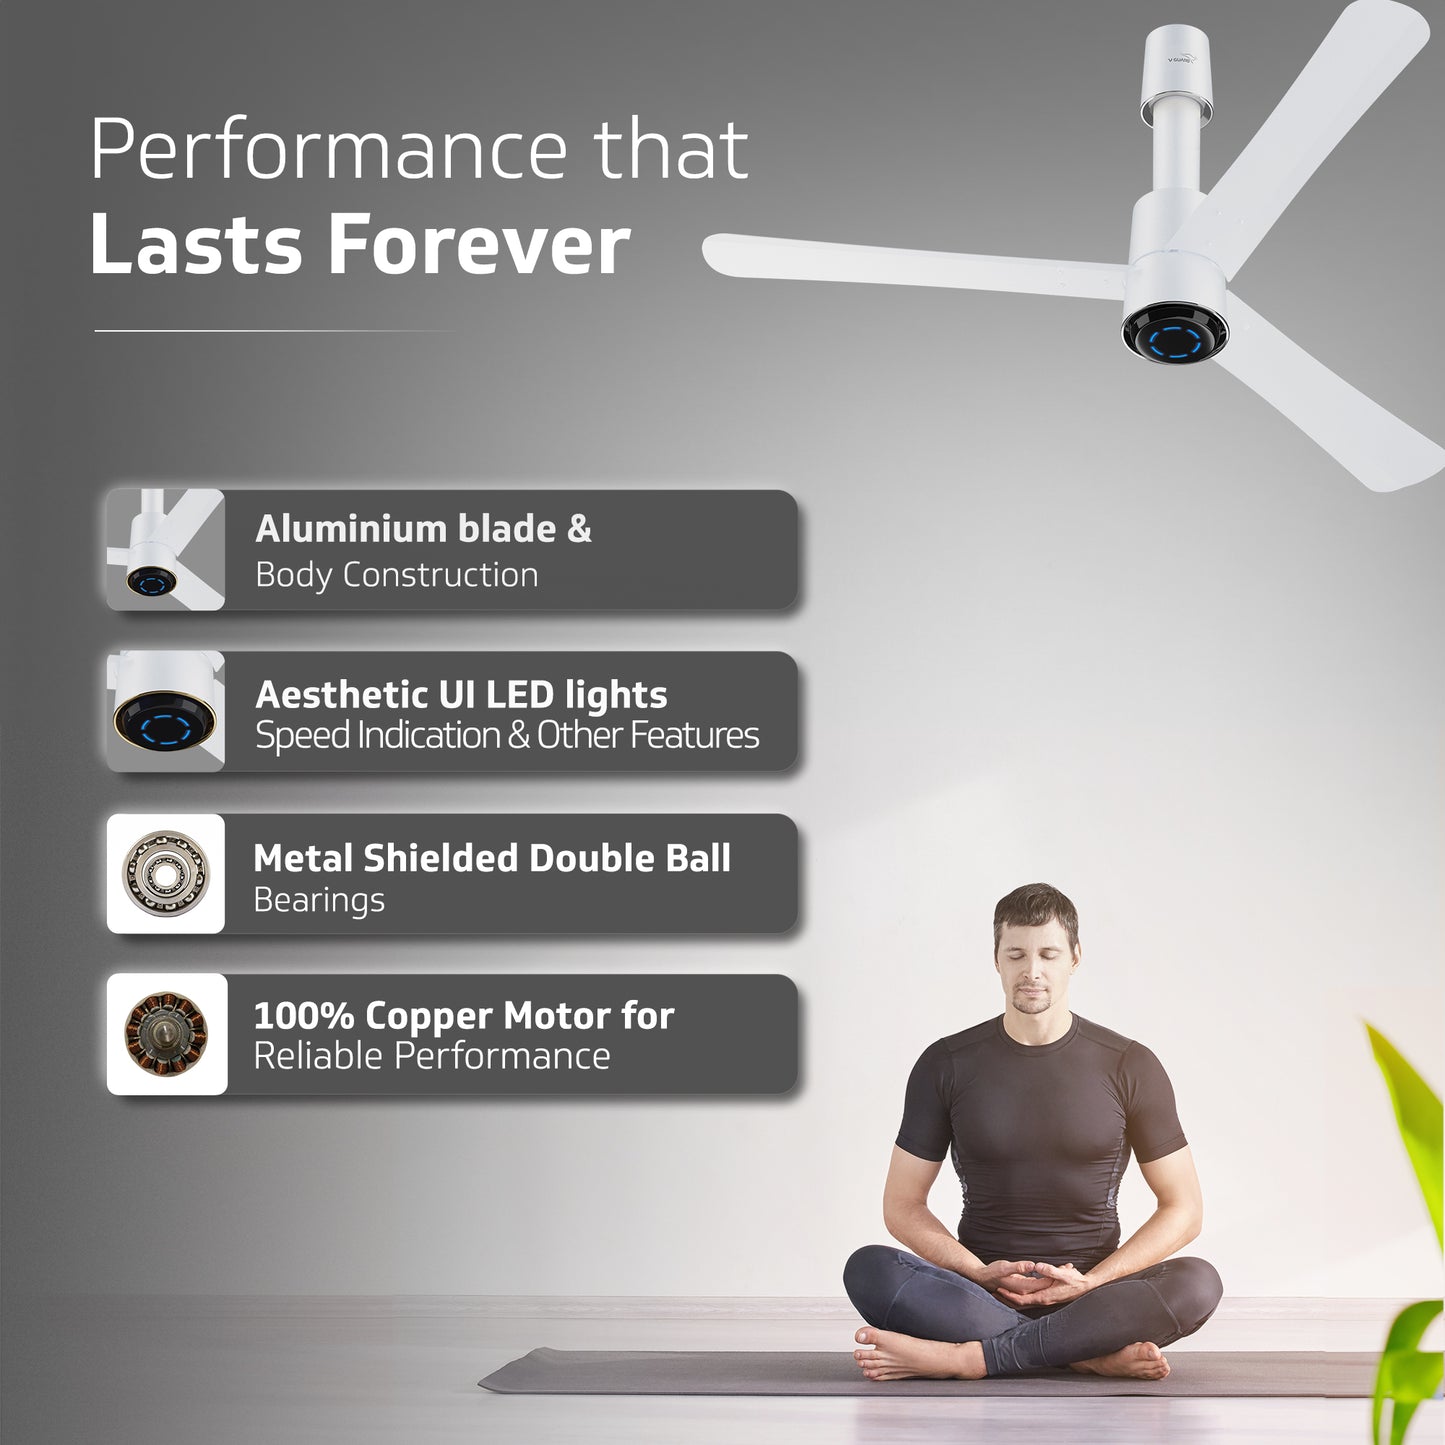 V-Guard INSIGHT-G Premium BLDC Ceiling Fan For Home | 6 Speed Settings | 5-Star Energy Saving | Convenient Remote Control | High-Speed 100% Copper Motor (Blossom White Matte)